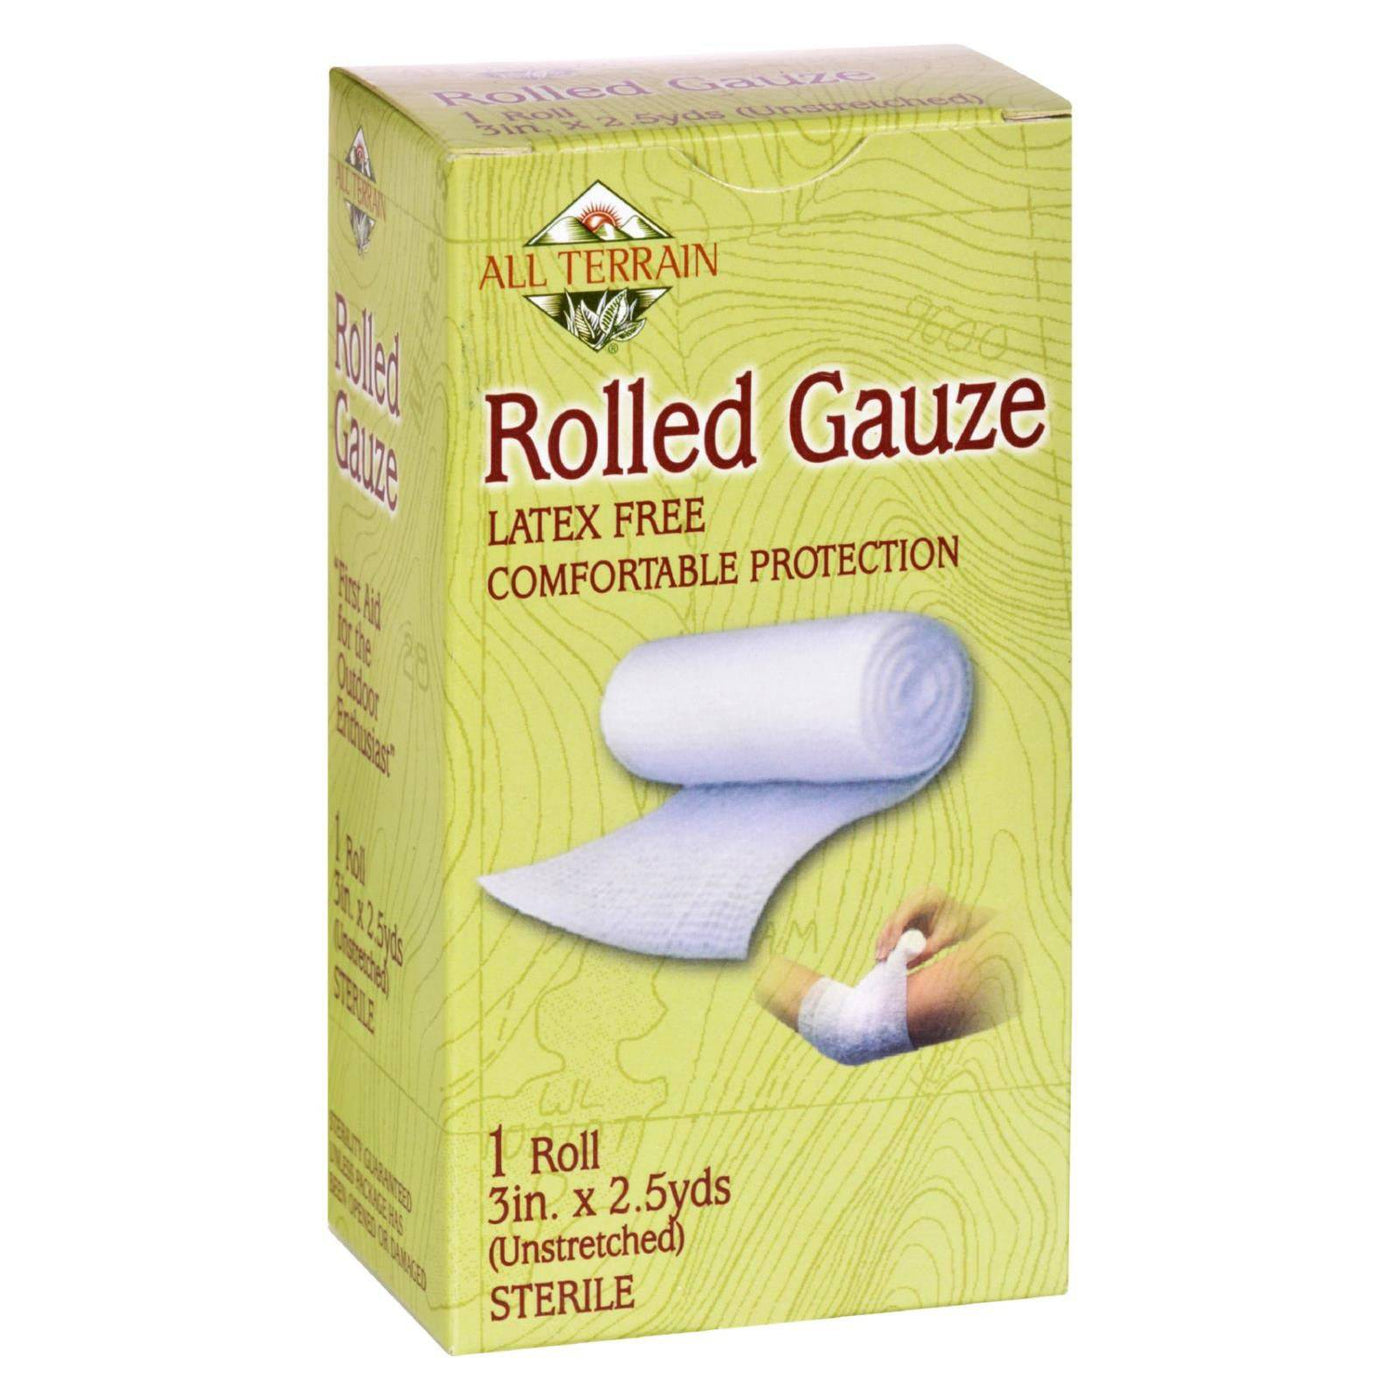 All Terrain - Gauze - Rolled - 3 Inches X 2.5 Yards - 1 Roll | OnlyNaturals.us